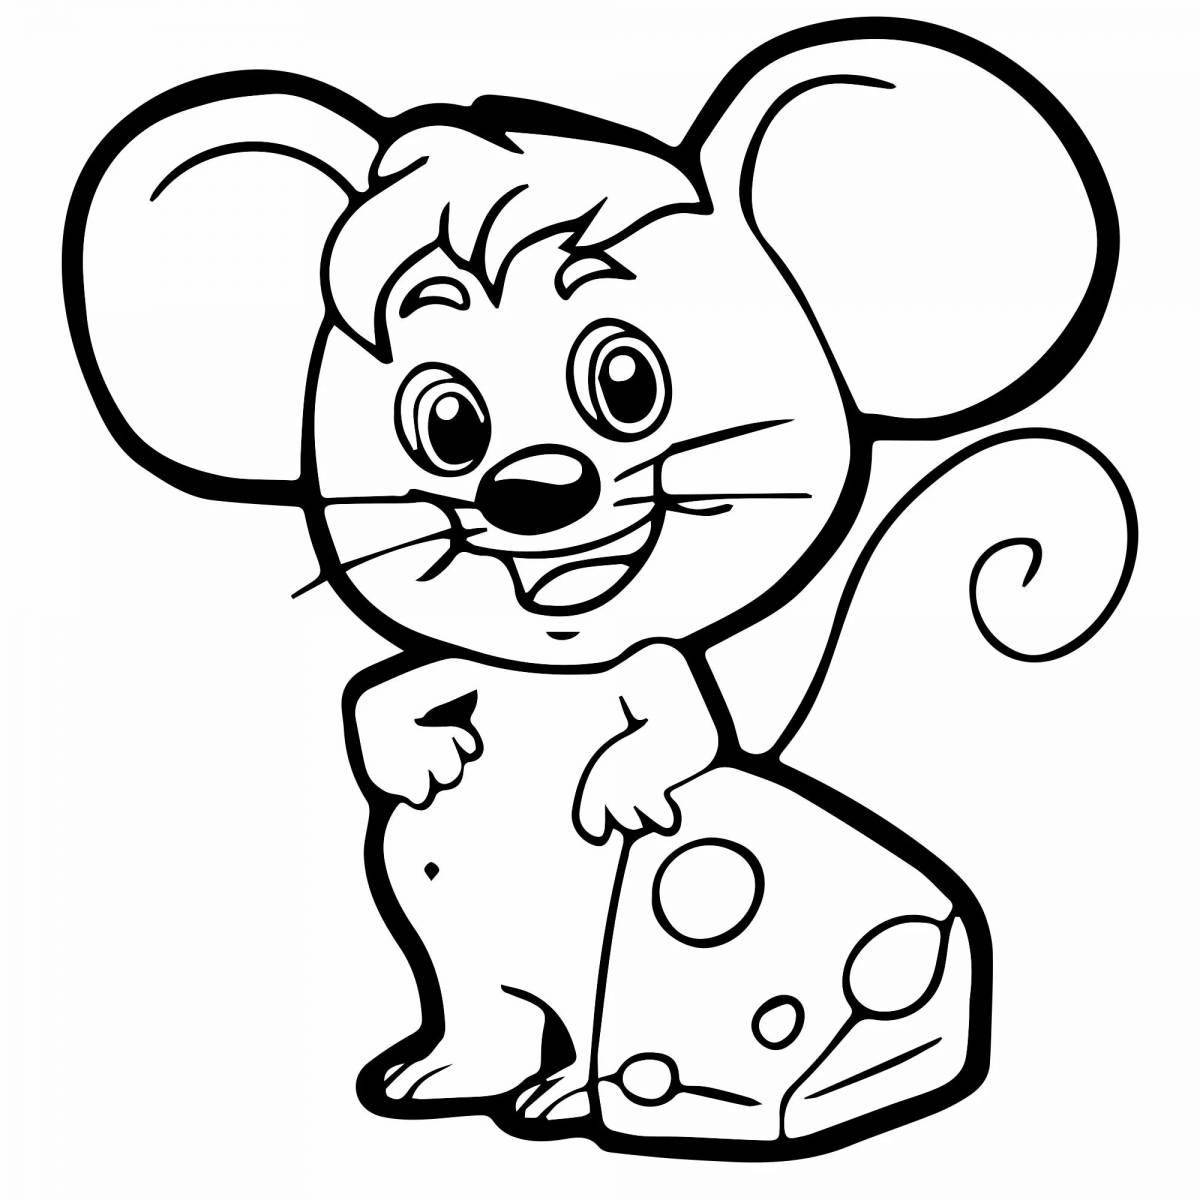 Nice mouse coloring book for 4-5 year olds